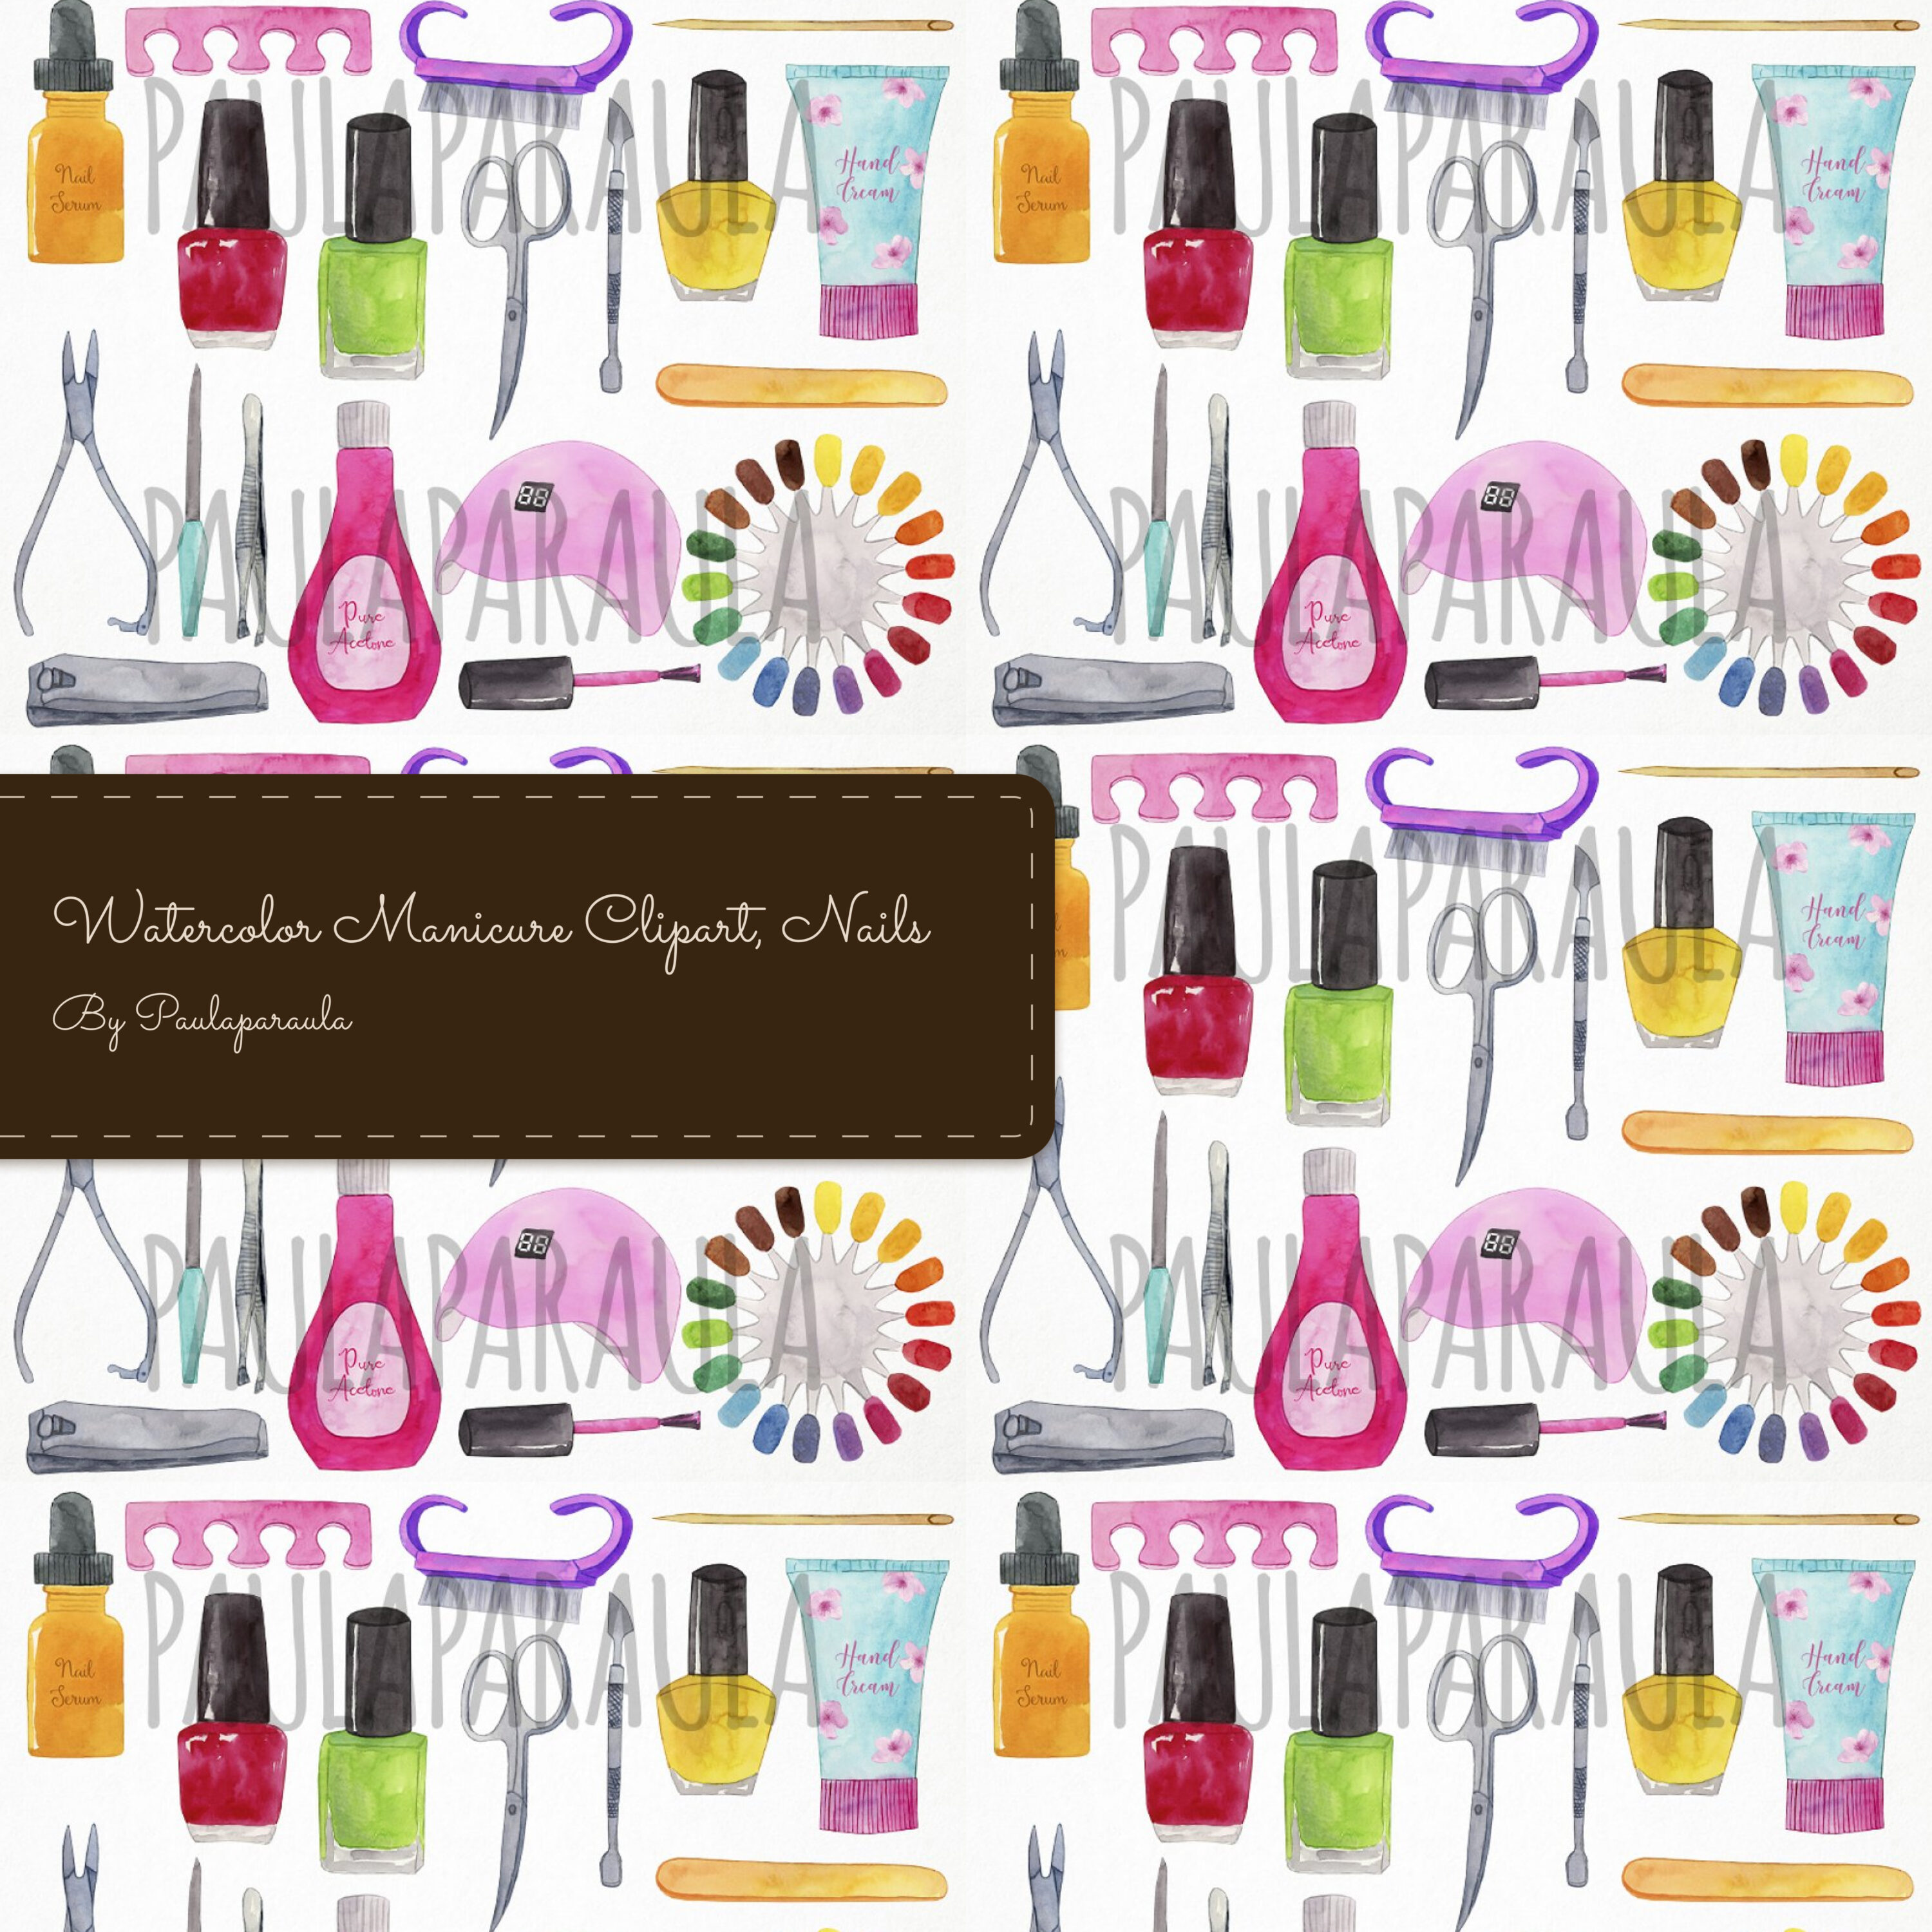 Prints of watercolor manicure clipart nails.